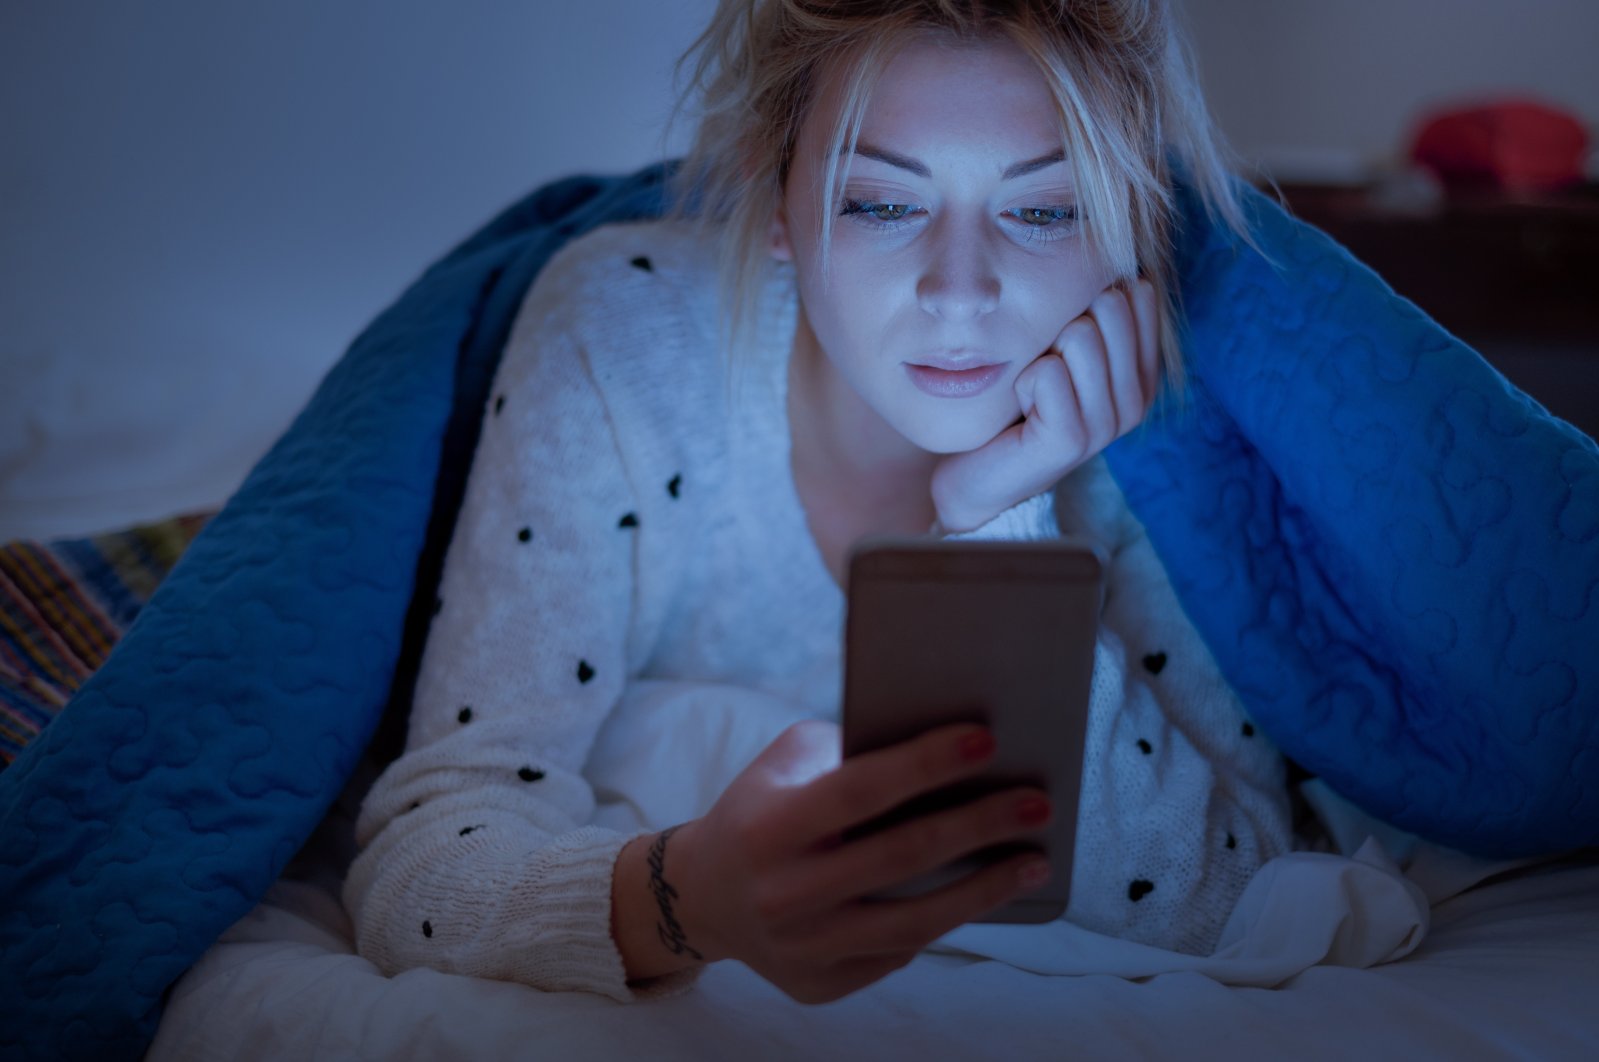 Almost half of the people surveyed said they used their phones in bed before sleep. (IHA Photo)